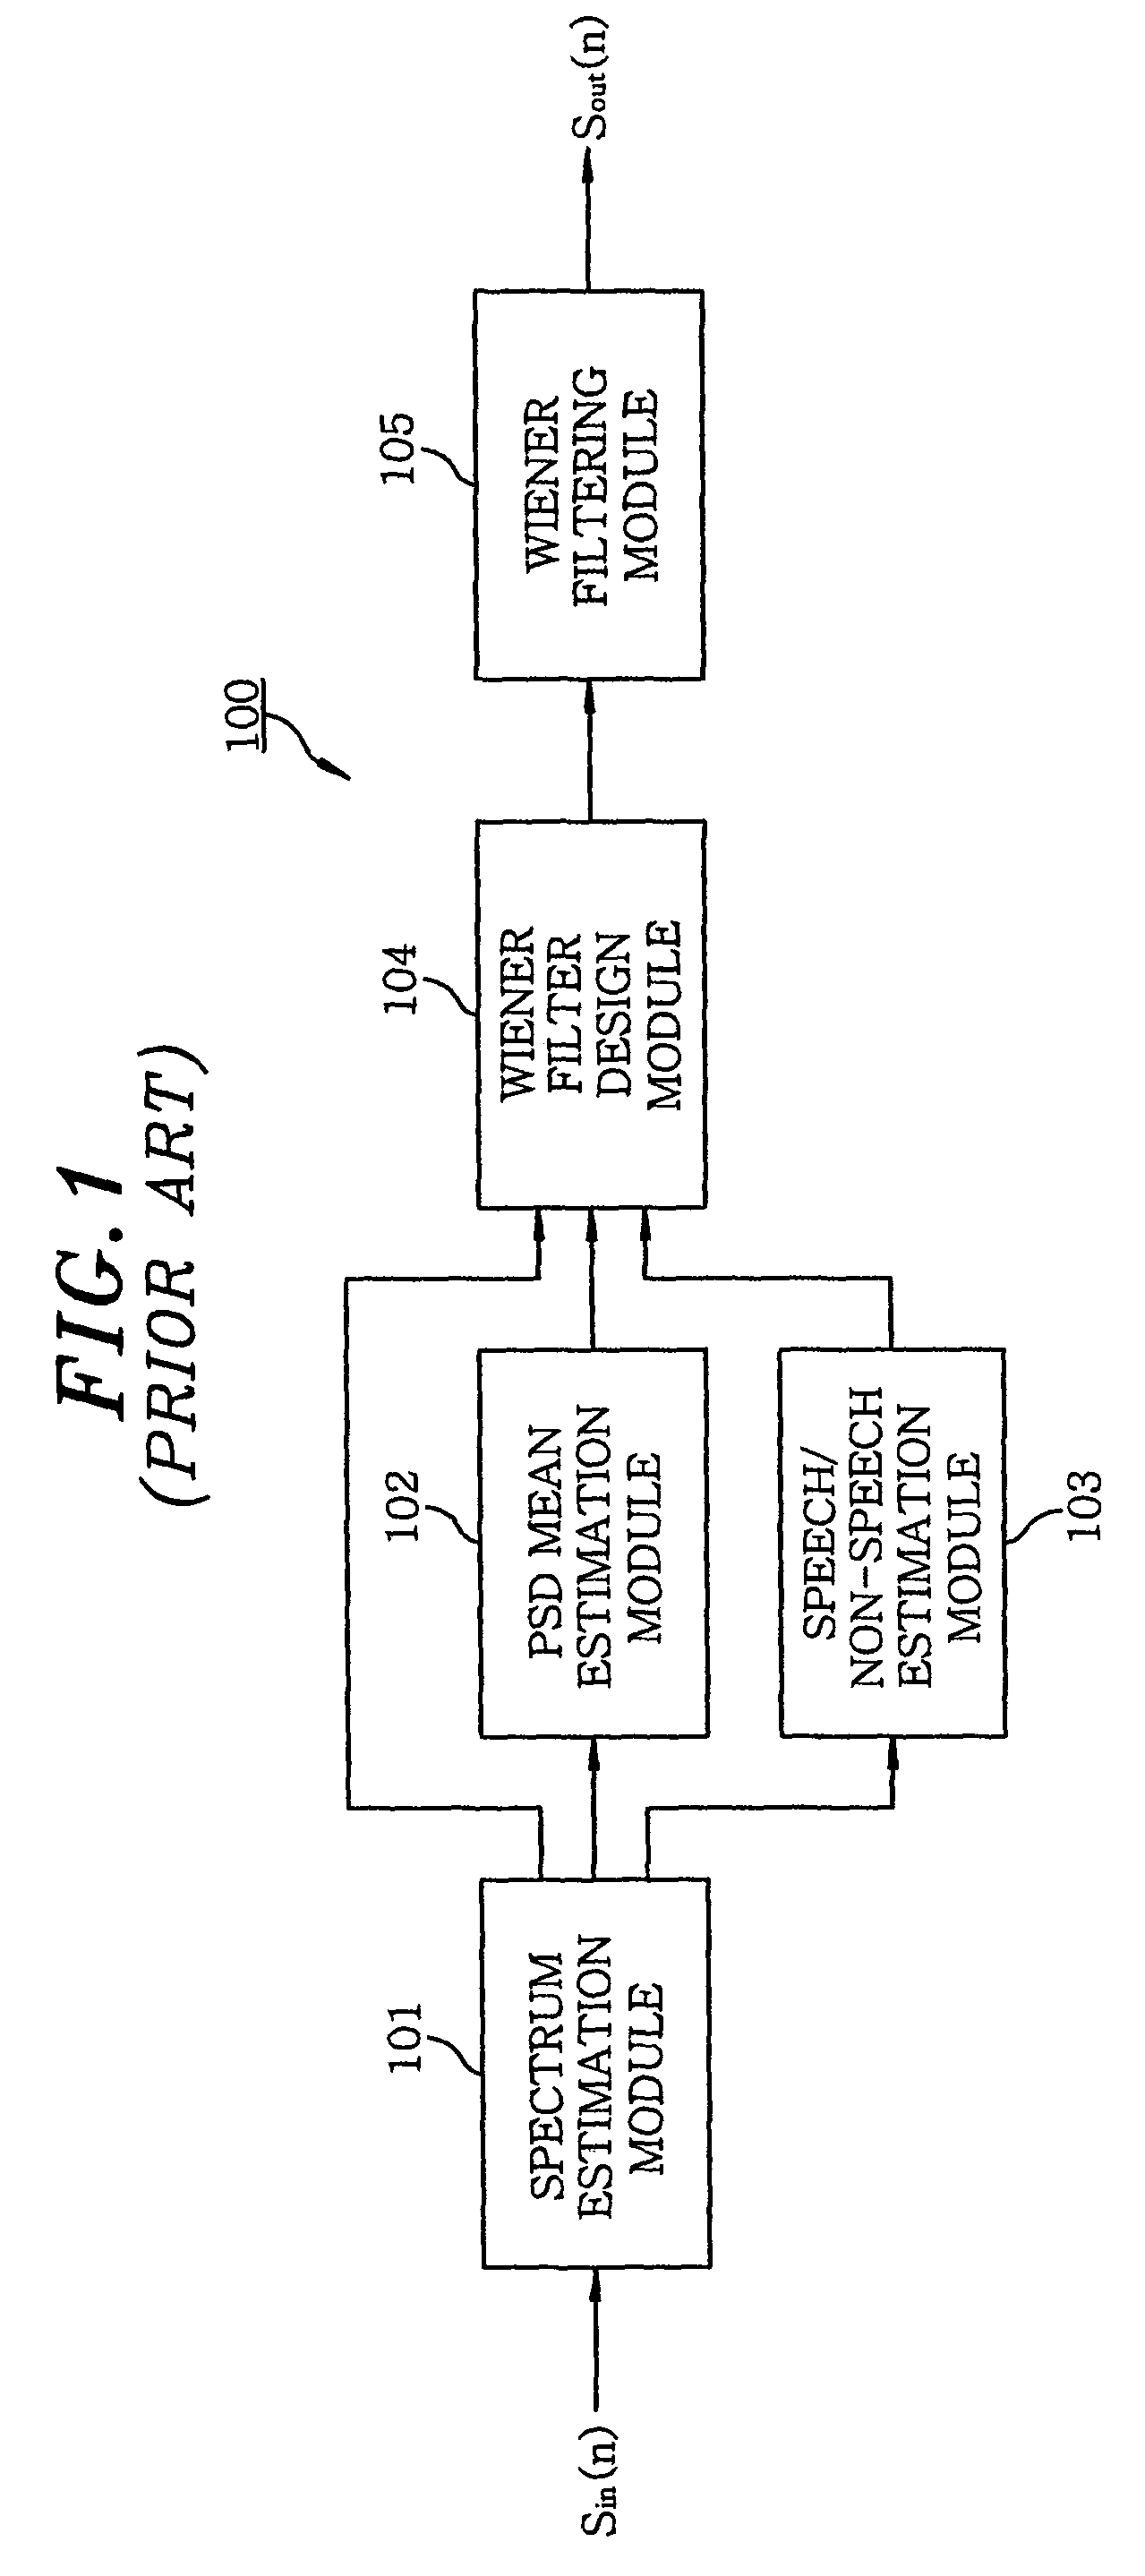 Noise cancellation system and method